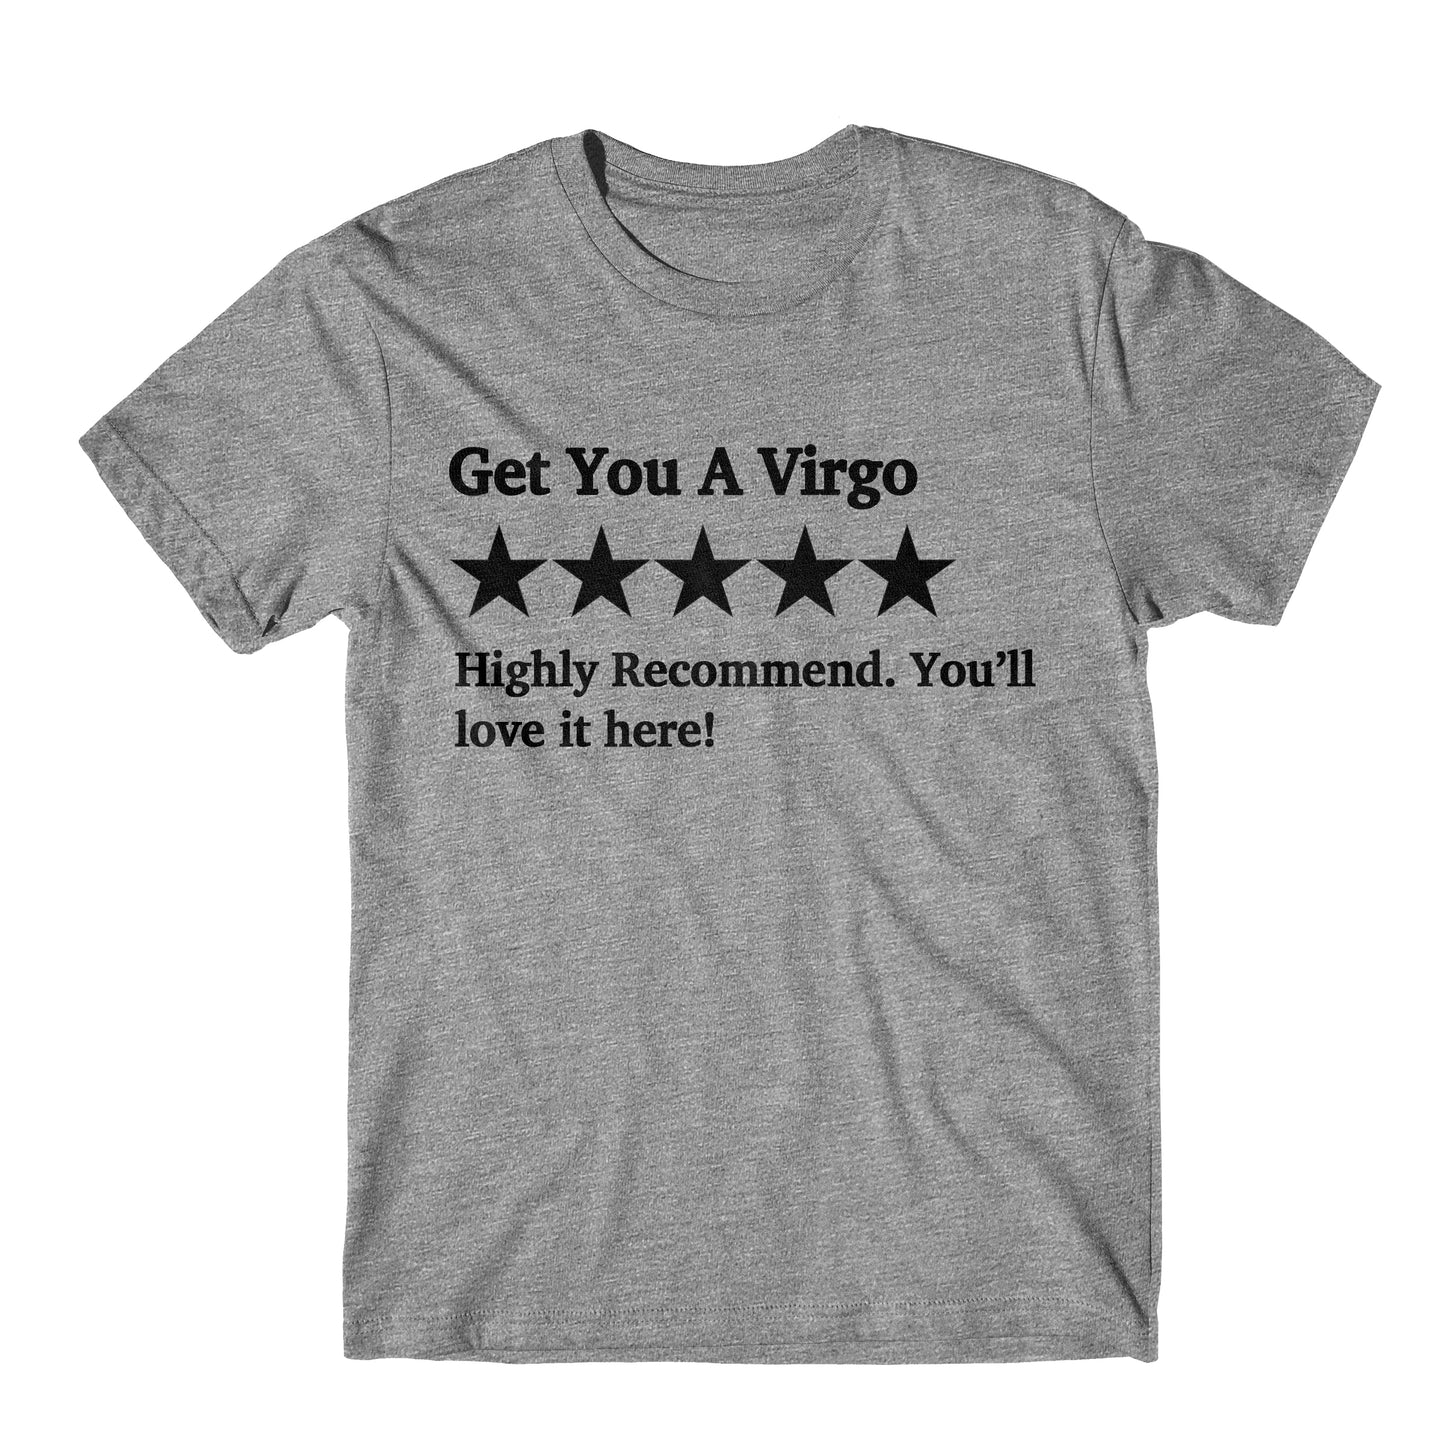 "Get You A Virgo Five Star Rating" Tee